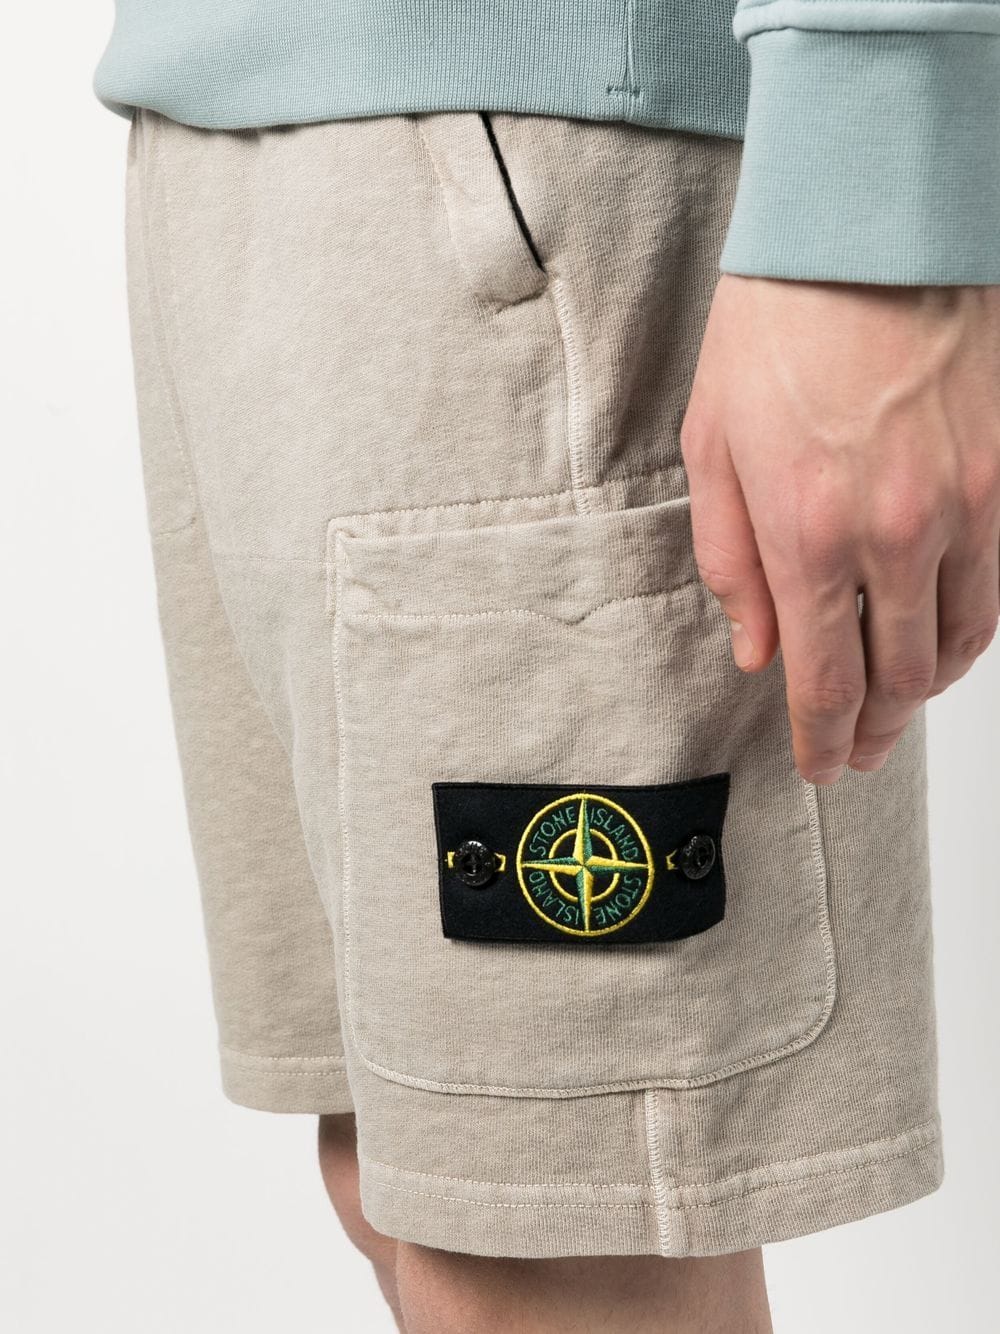 The Role of Stone Island Badges in Branding: The Emblem of Iconic Streetwear